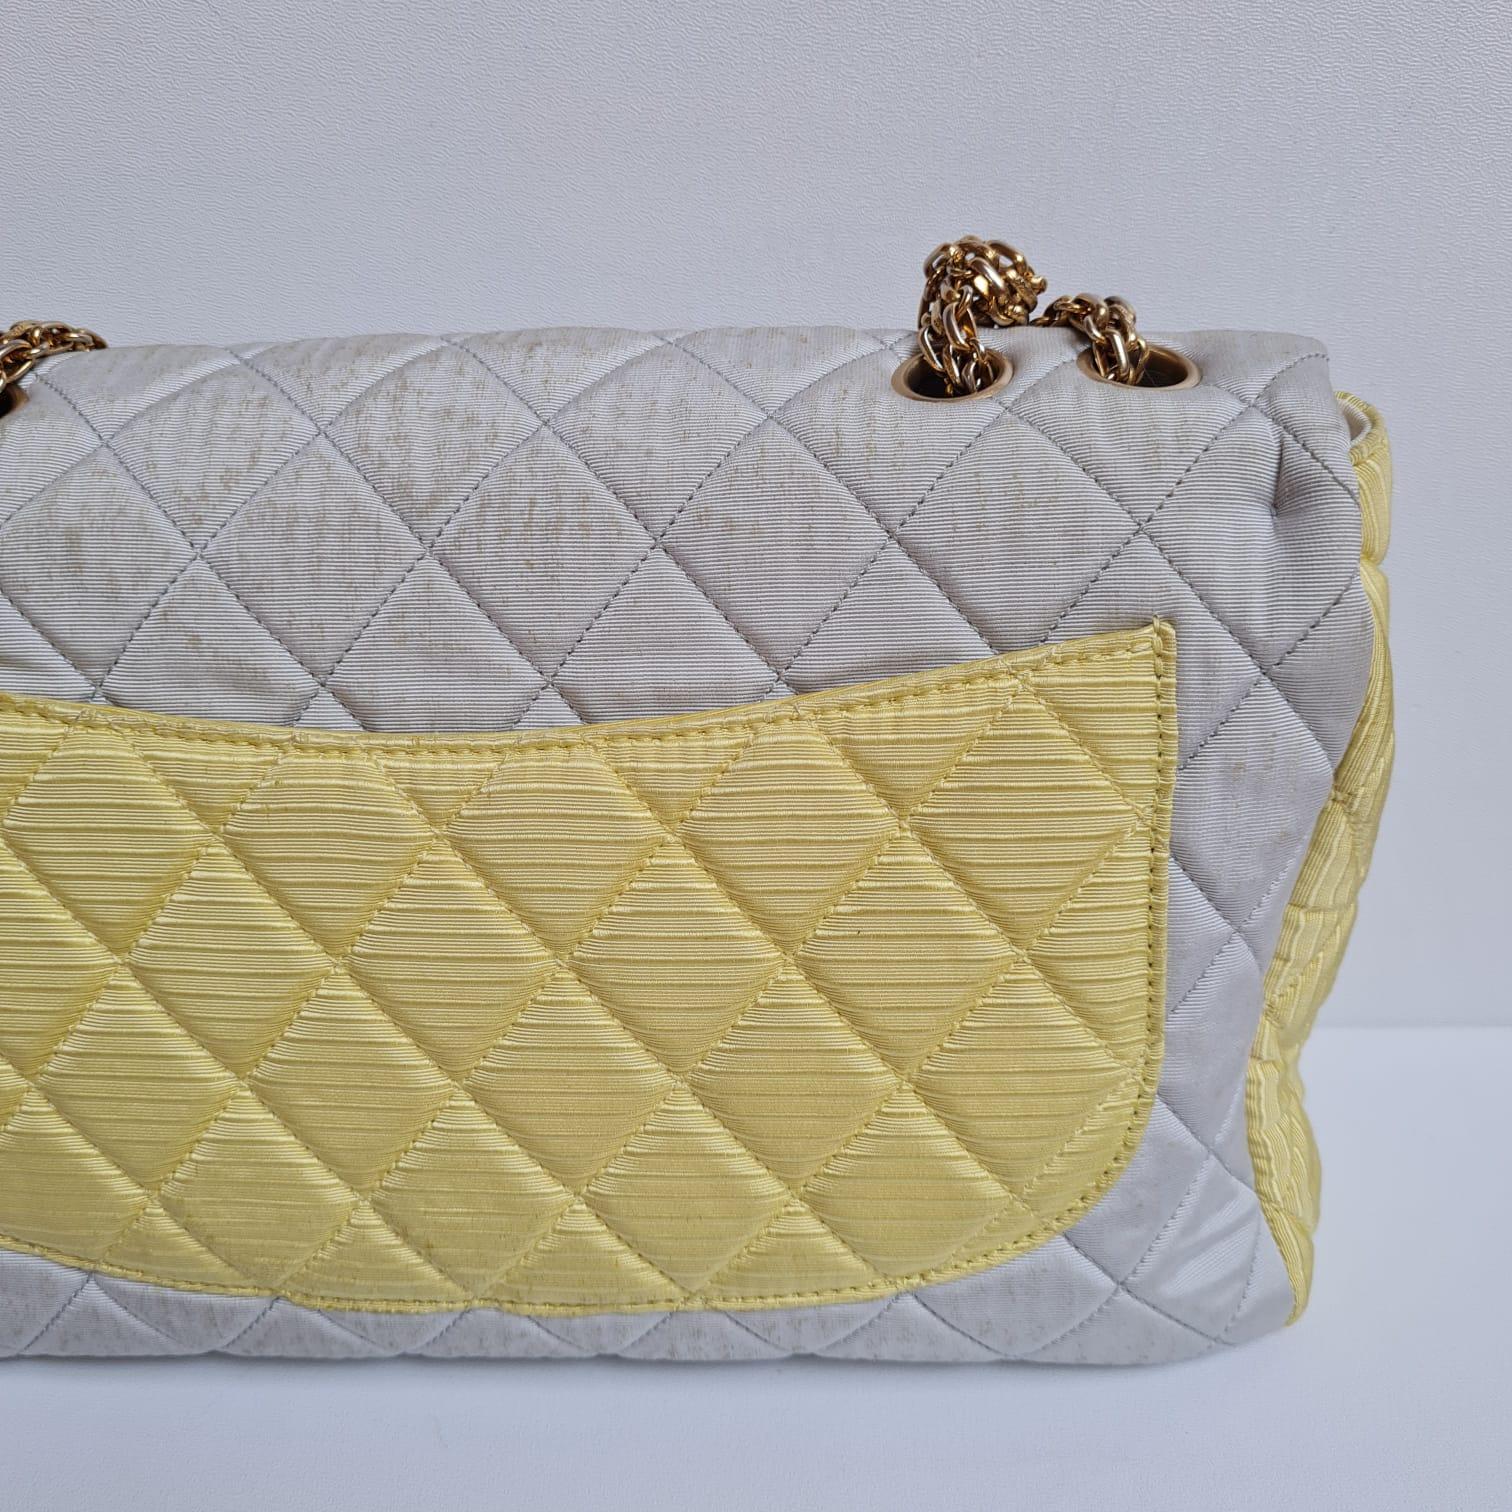 Chanel Pastel Tricolor 2.55 Canvas Quilted 227 Reissue Flap Bag For Sale 8